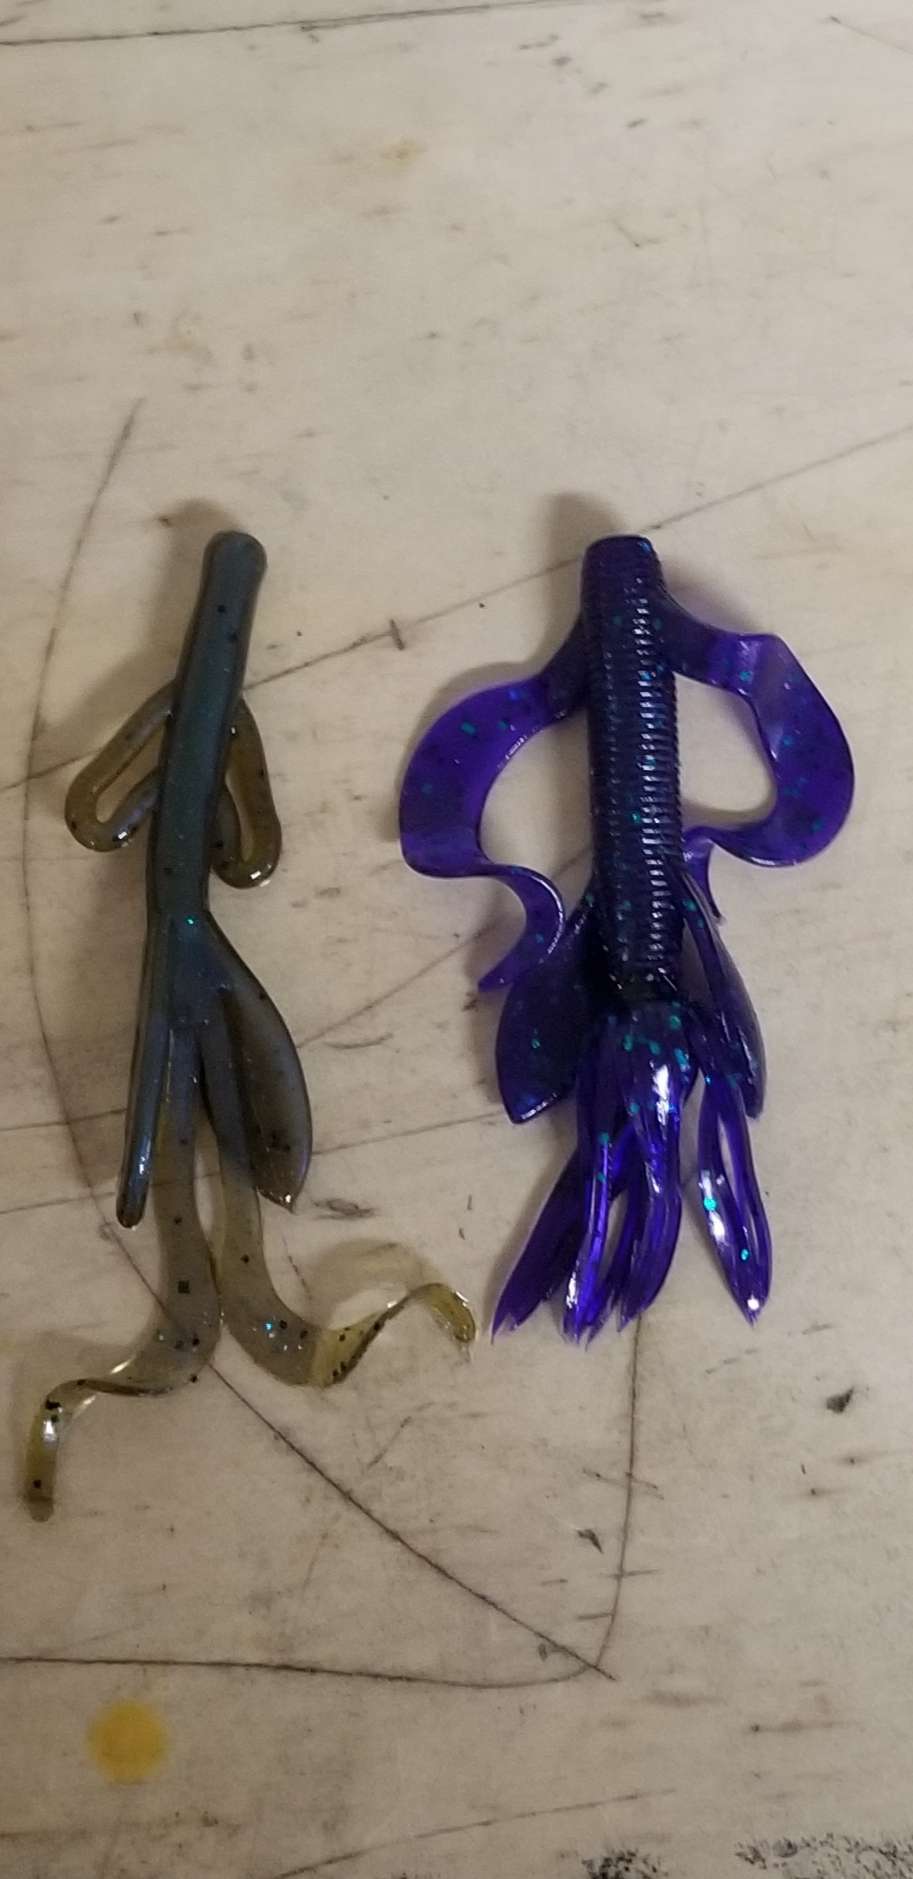  Yum Lures Wooly Bug Creature Bait Soft Plastic Bass